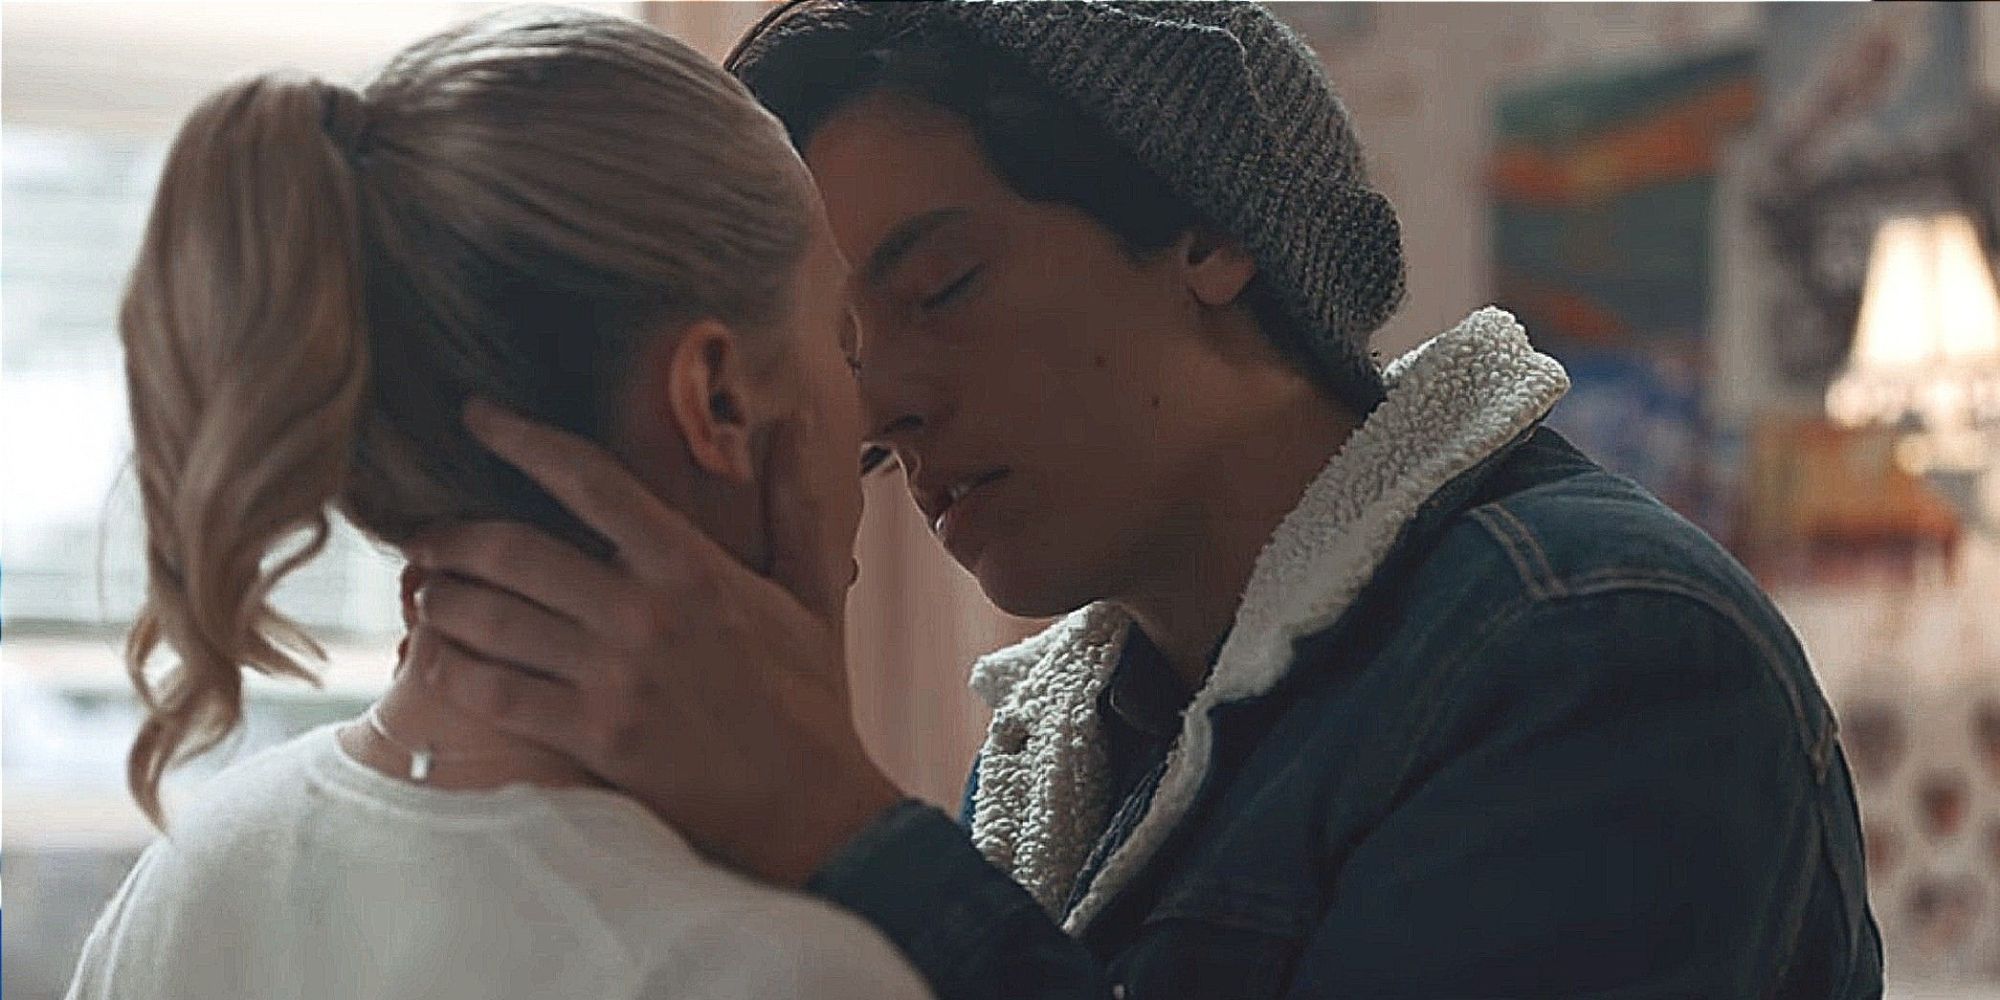 Jughead and Betty kiss for the first time